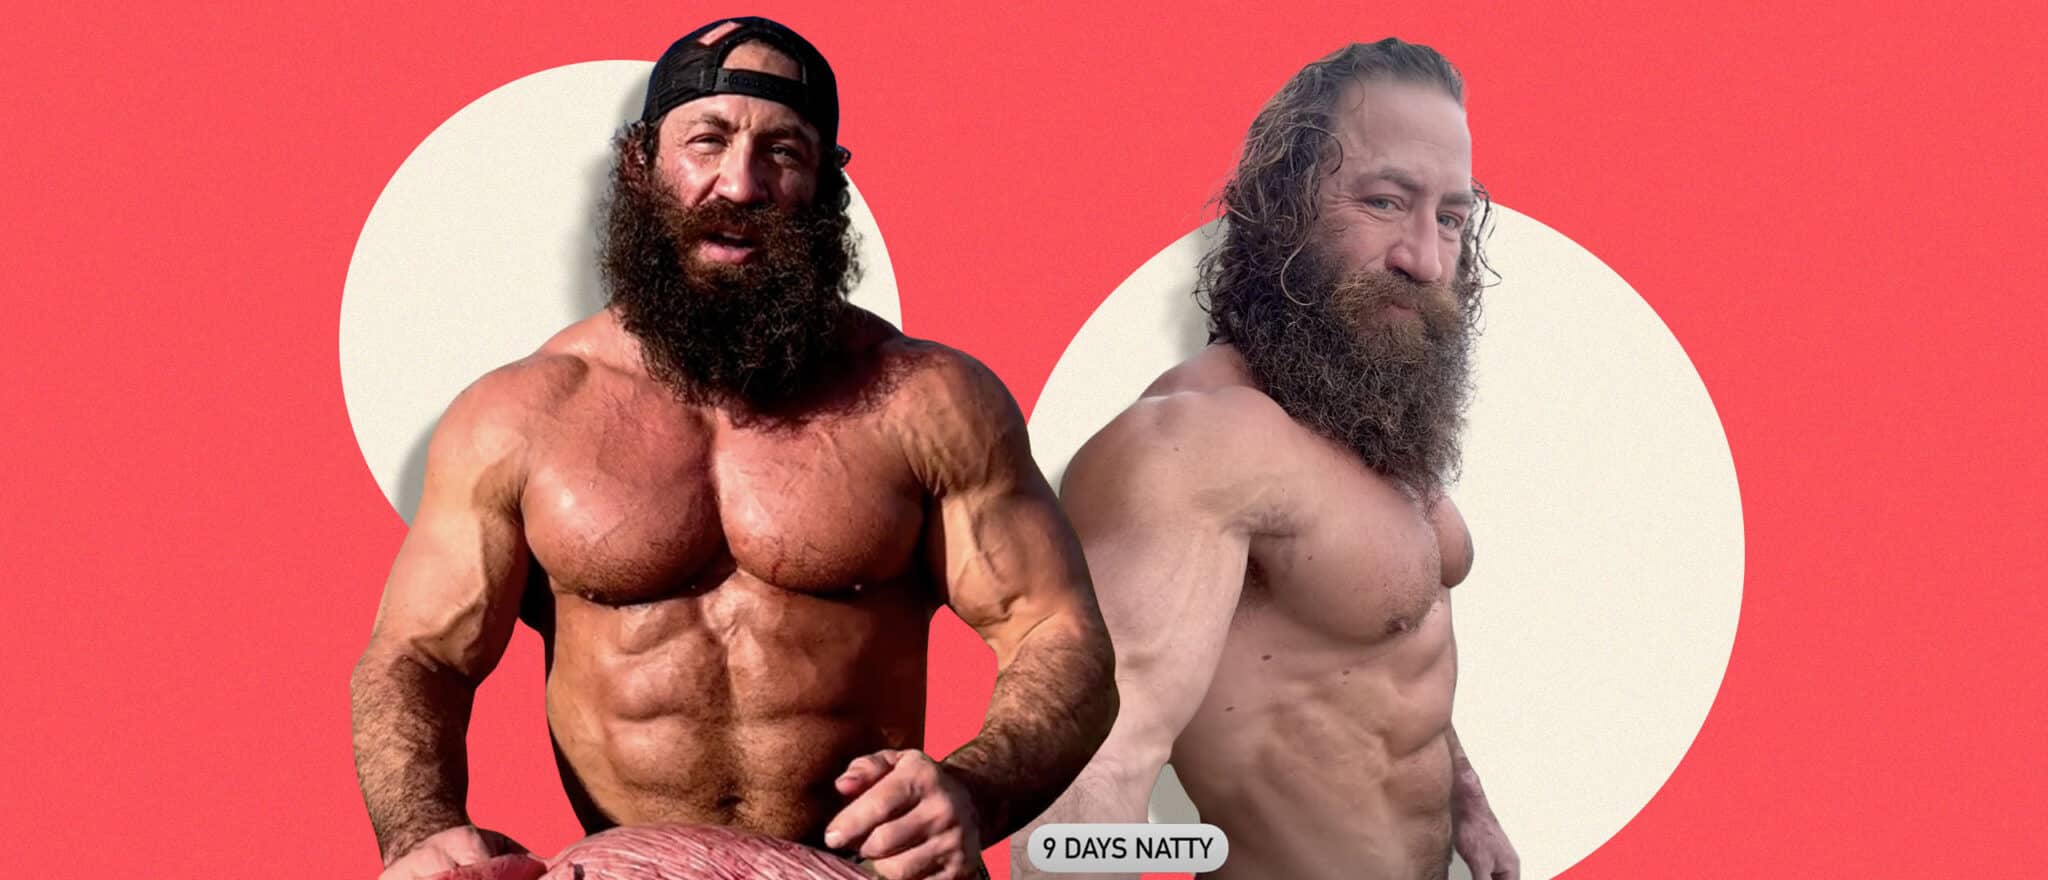 Liver King Says He’s Natty and Has the Pics to Prove It